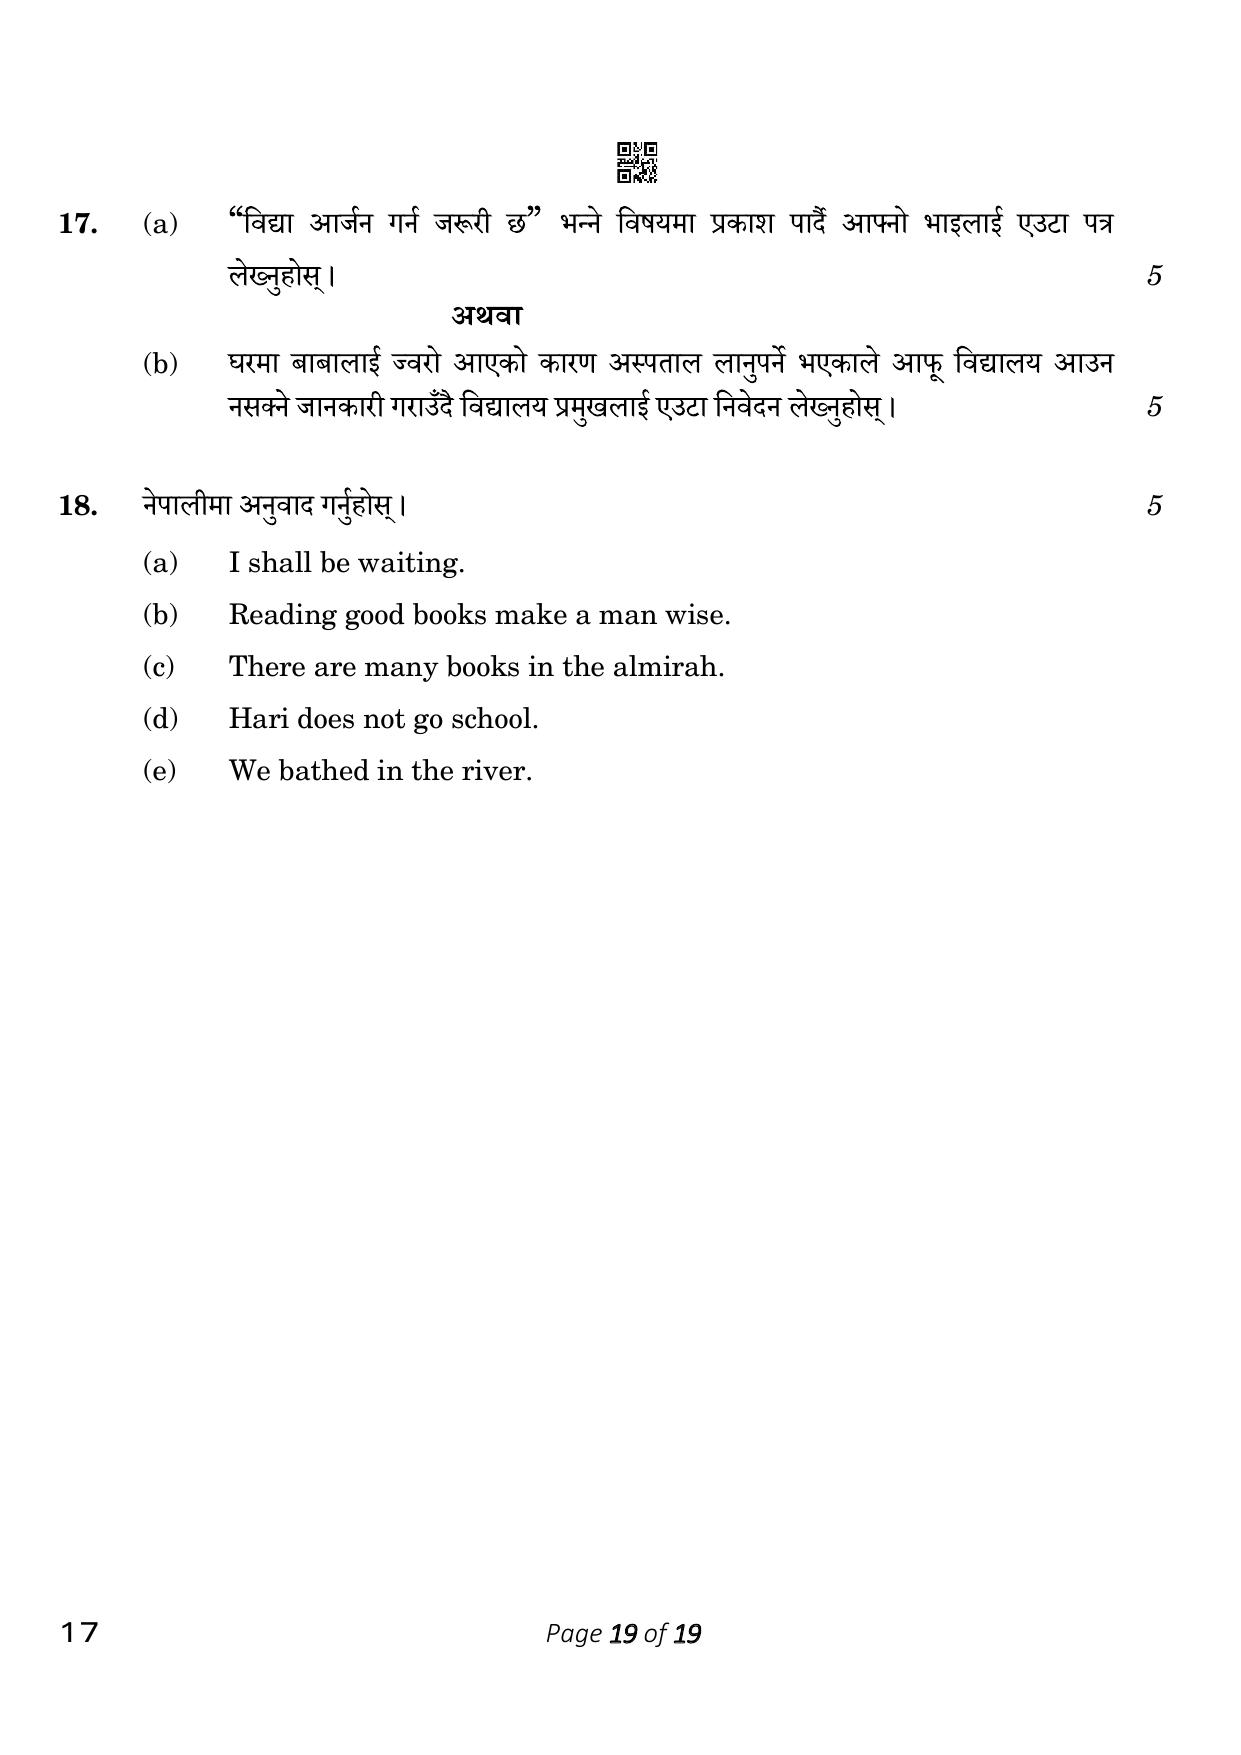 CBSE Class 10 Nepali (Compartment) 2023 Question Paper - Page 19